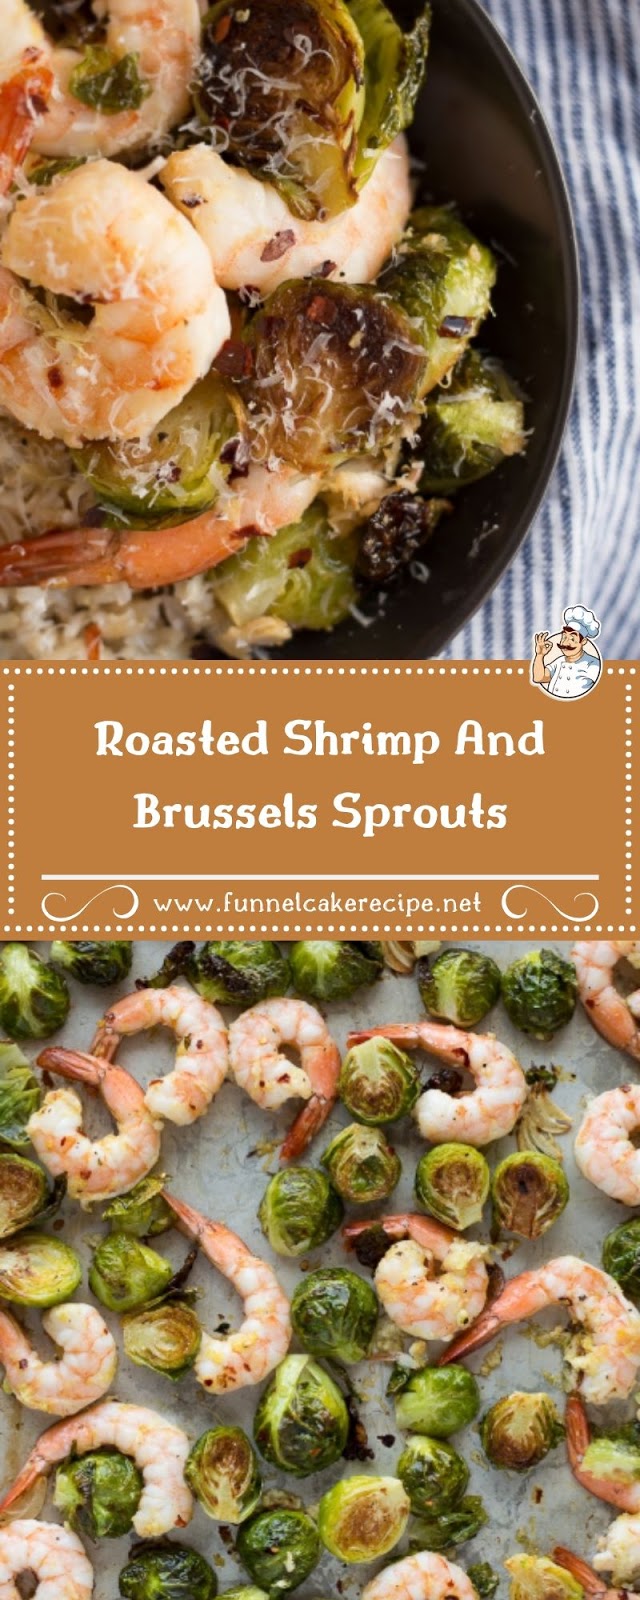 Roasted Shrimp And Brussels Sprouts